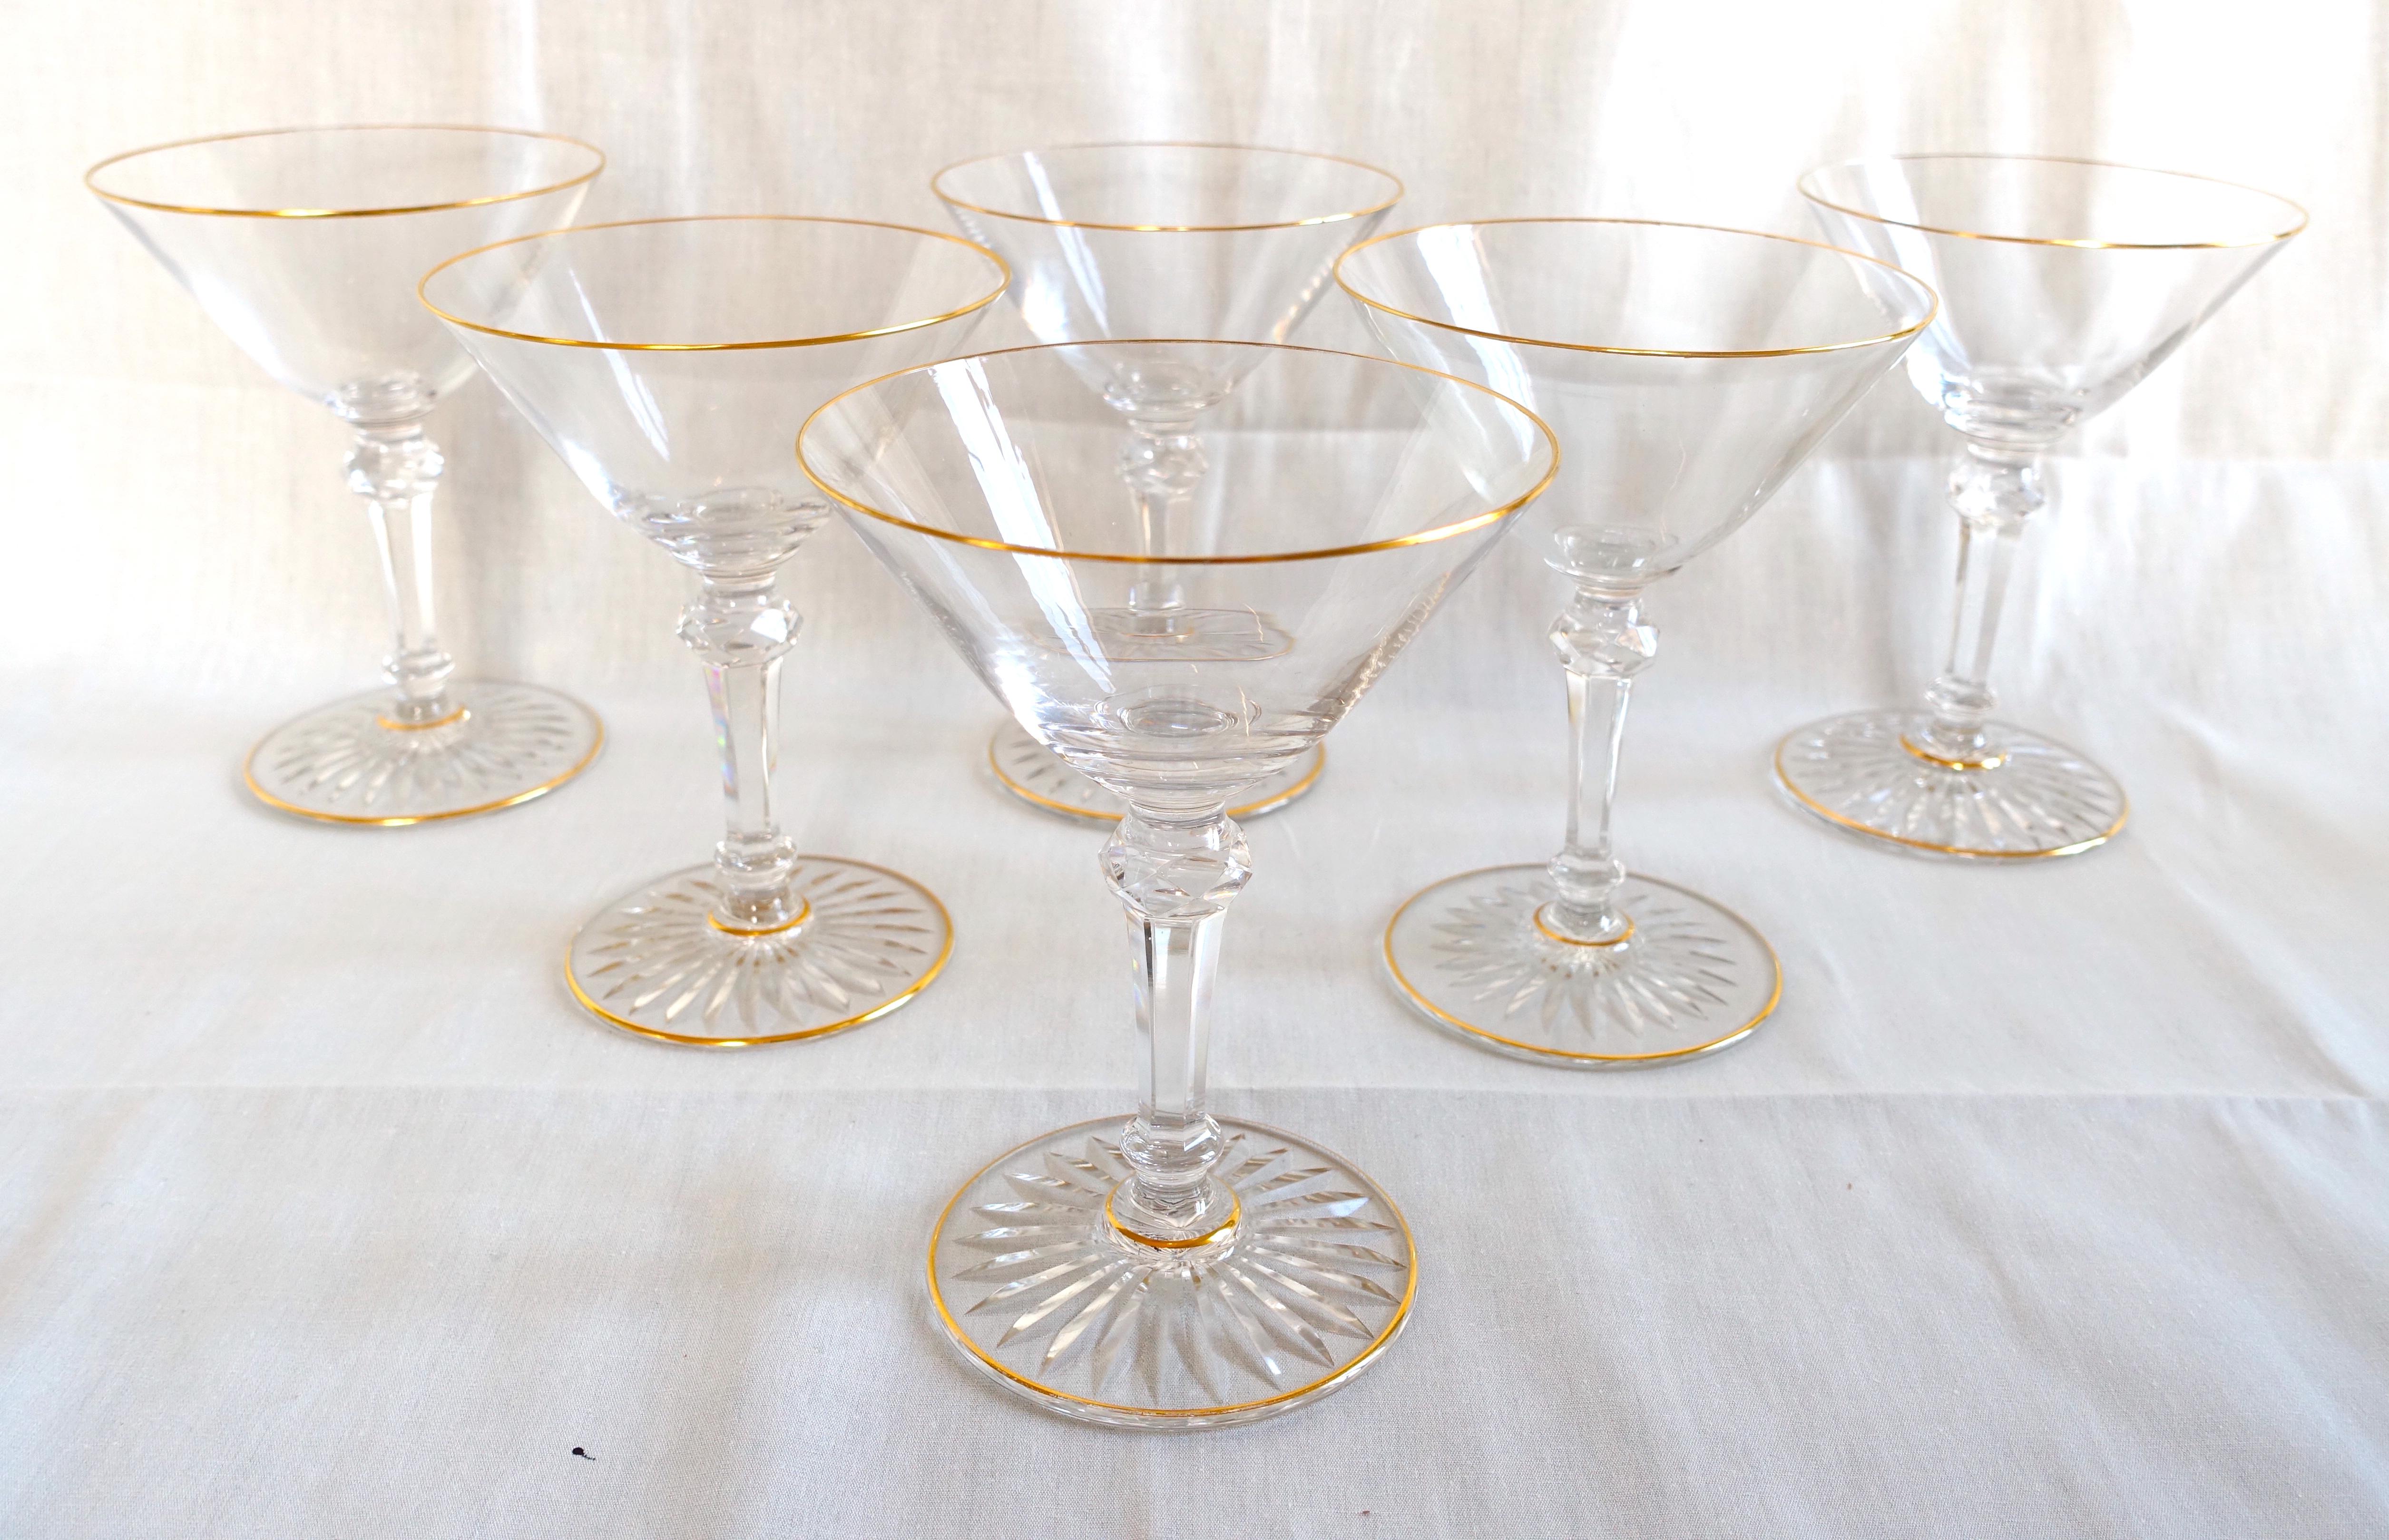 Crystal Baccarat crystal champagne glass - fine gold gilt - early 20th century